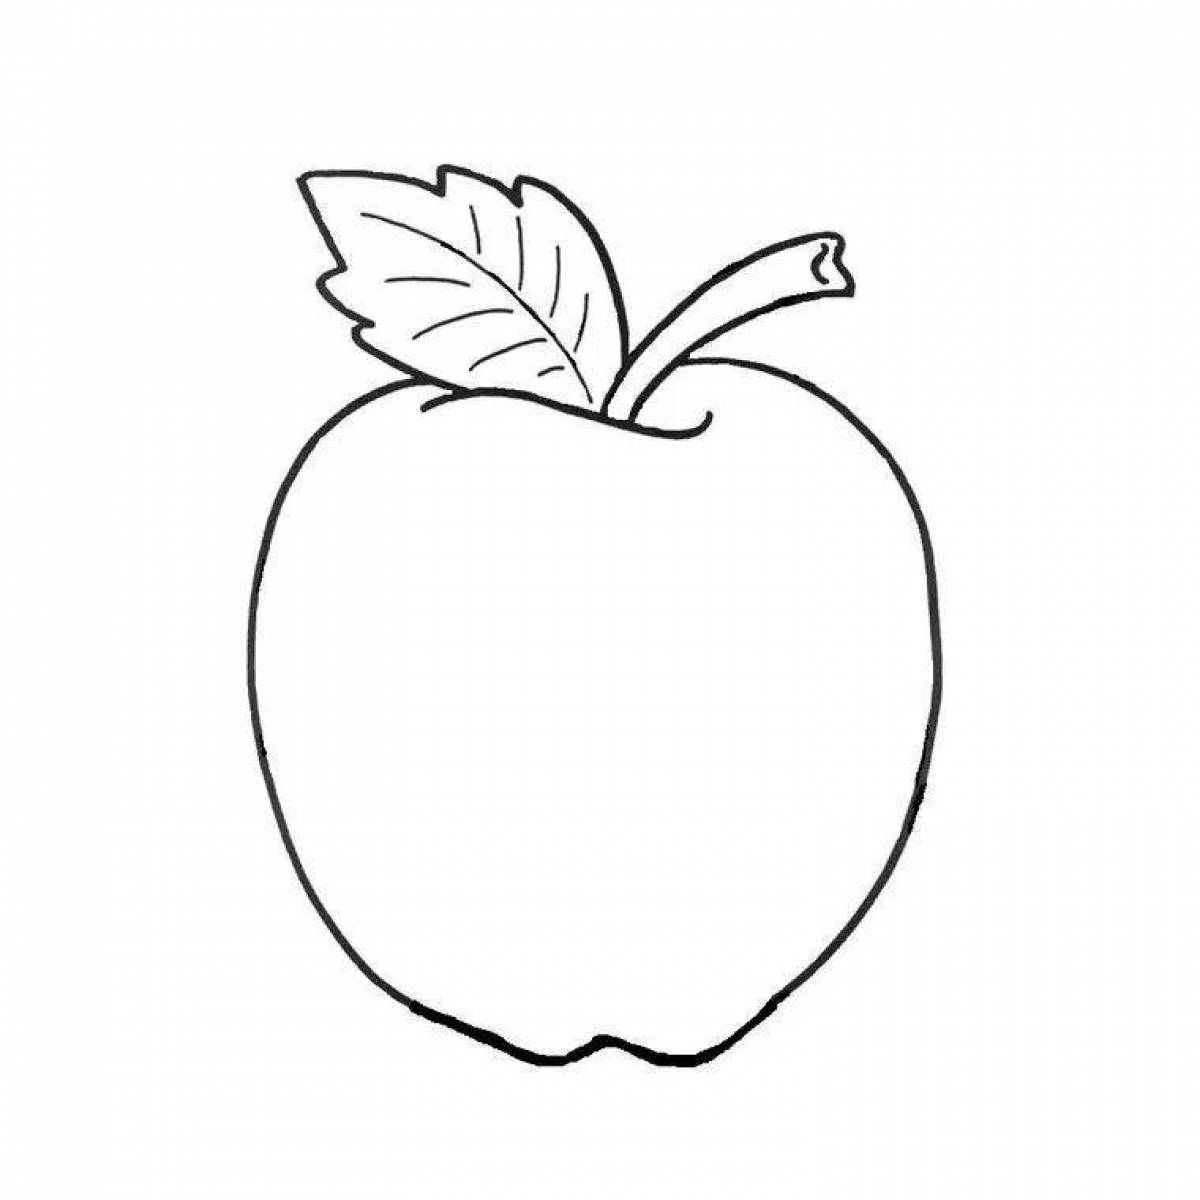 Gorgeous apple and pear coloring page